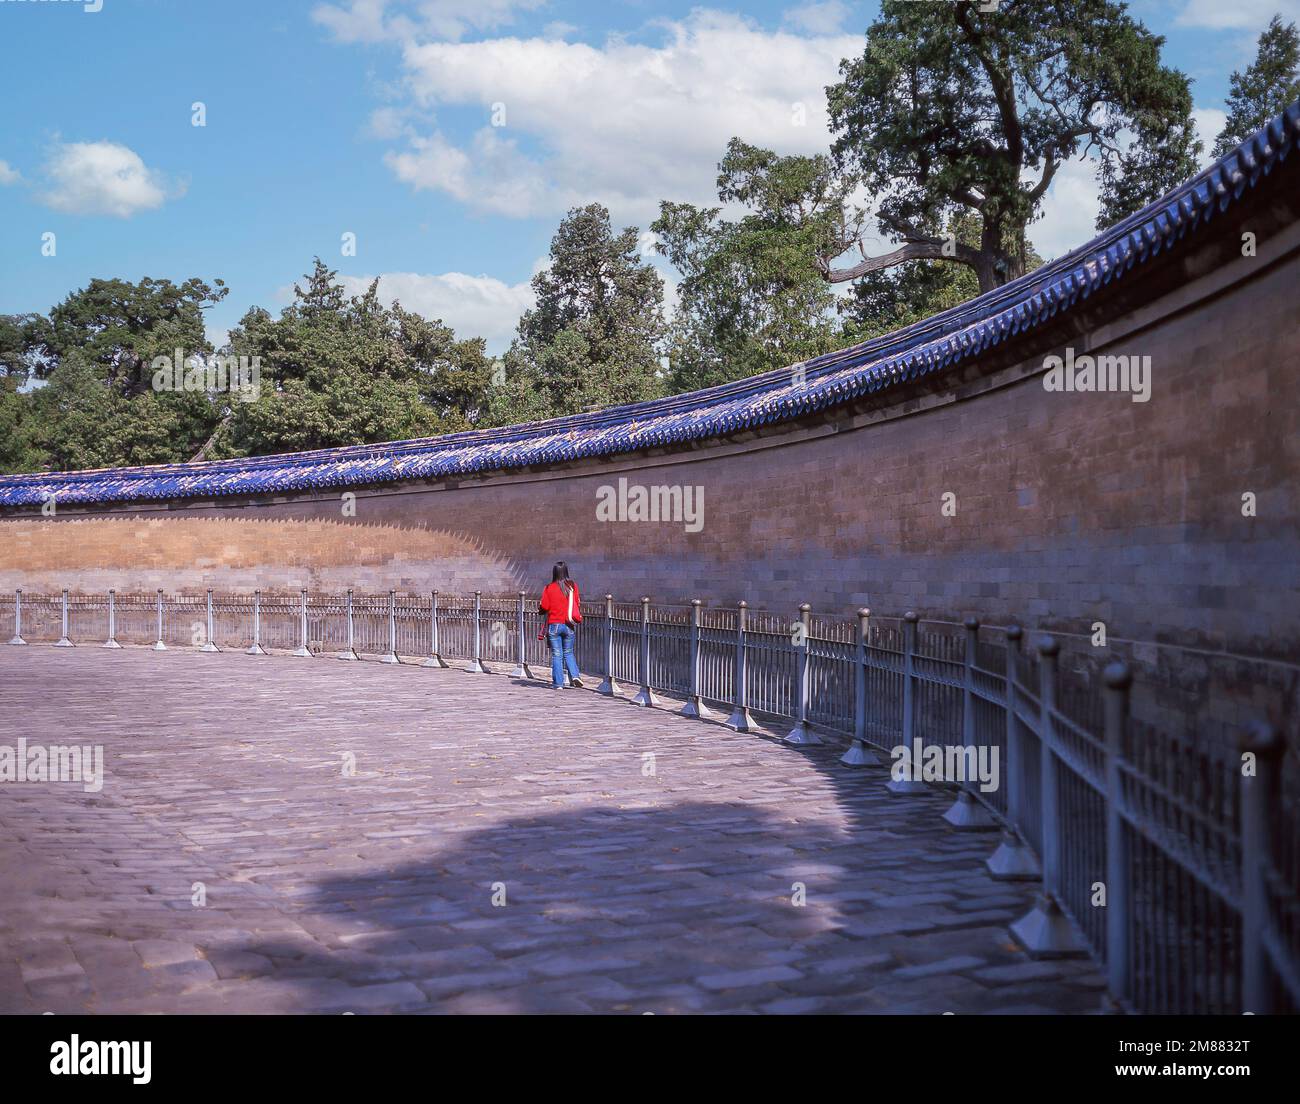 The Echo Wall in The Imperial Vault of Heaven, Temple of Heaven, Dongcheng, Beijing, Beijing and Northeast, The People's Republic of China Stock Photo